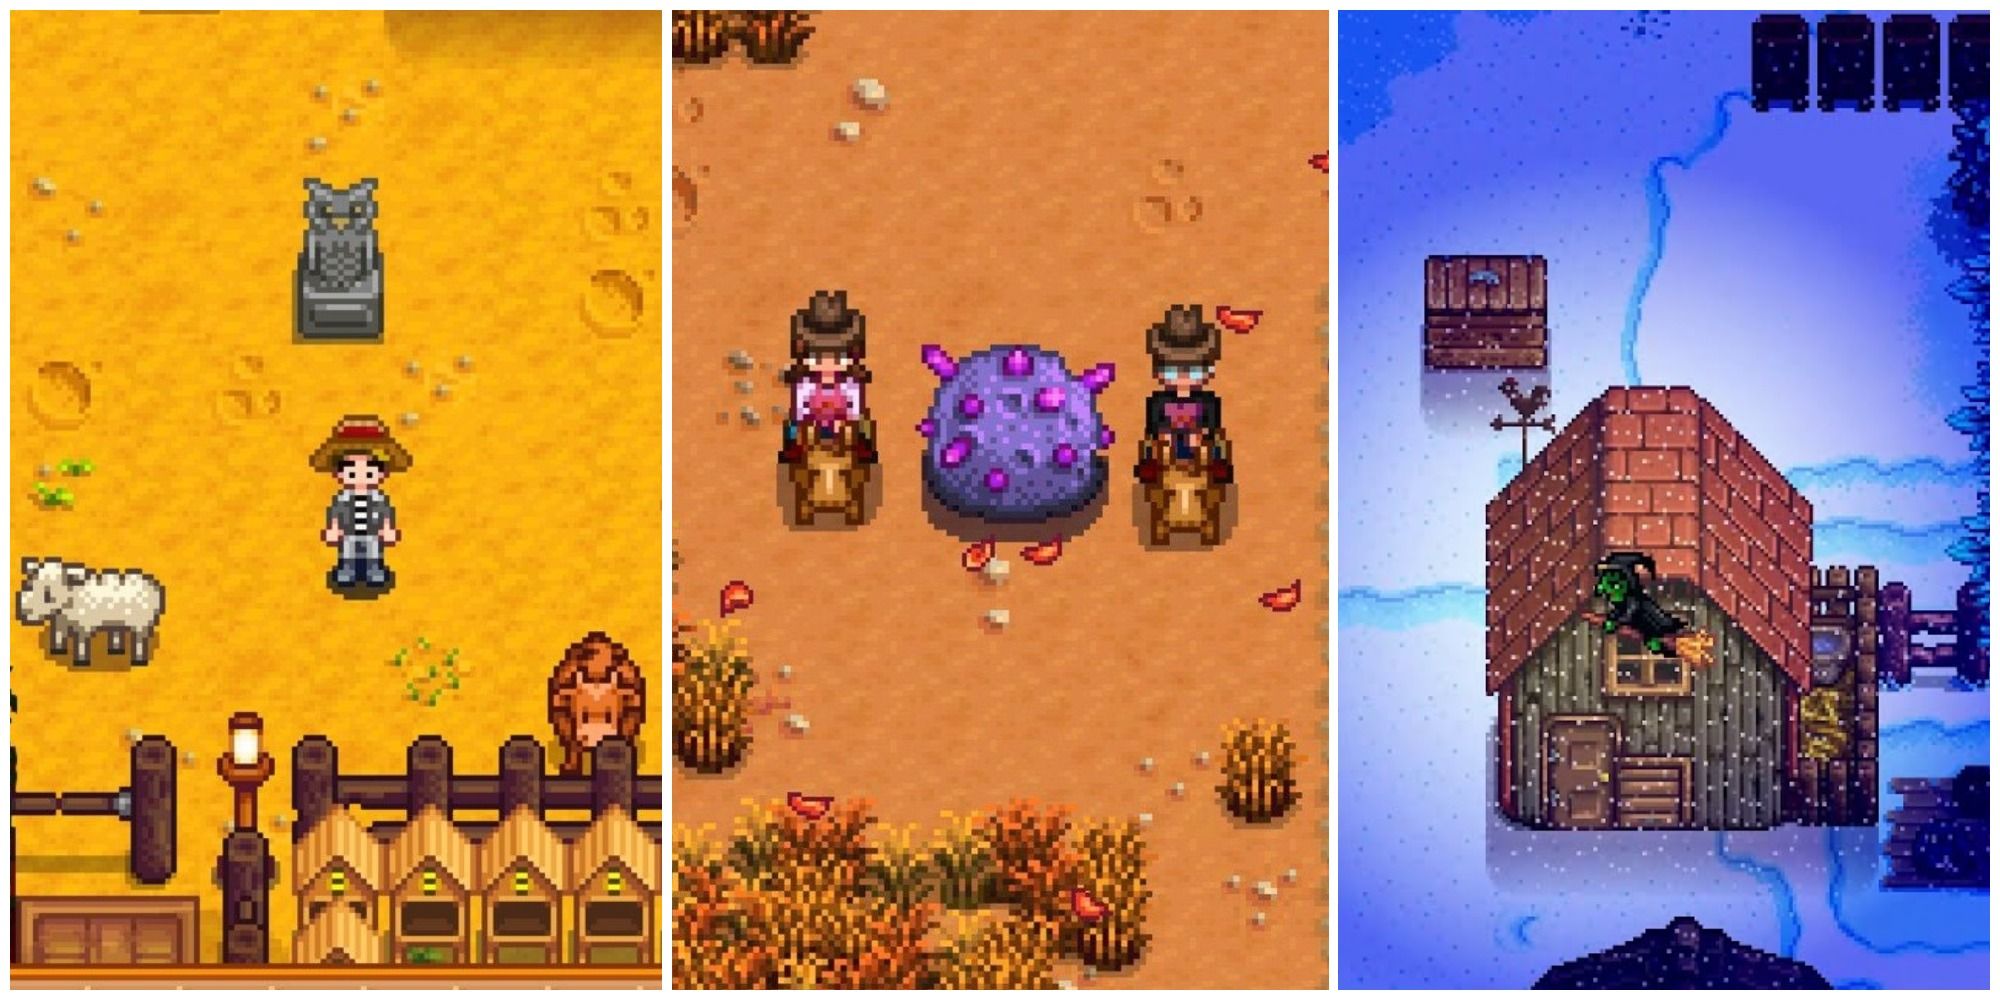 The Rarest Events In Stardew Valley Ranked